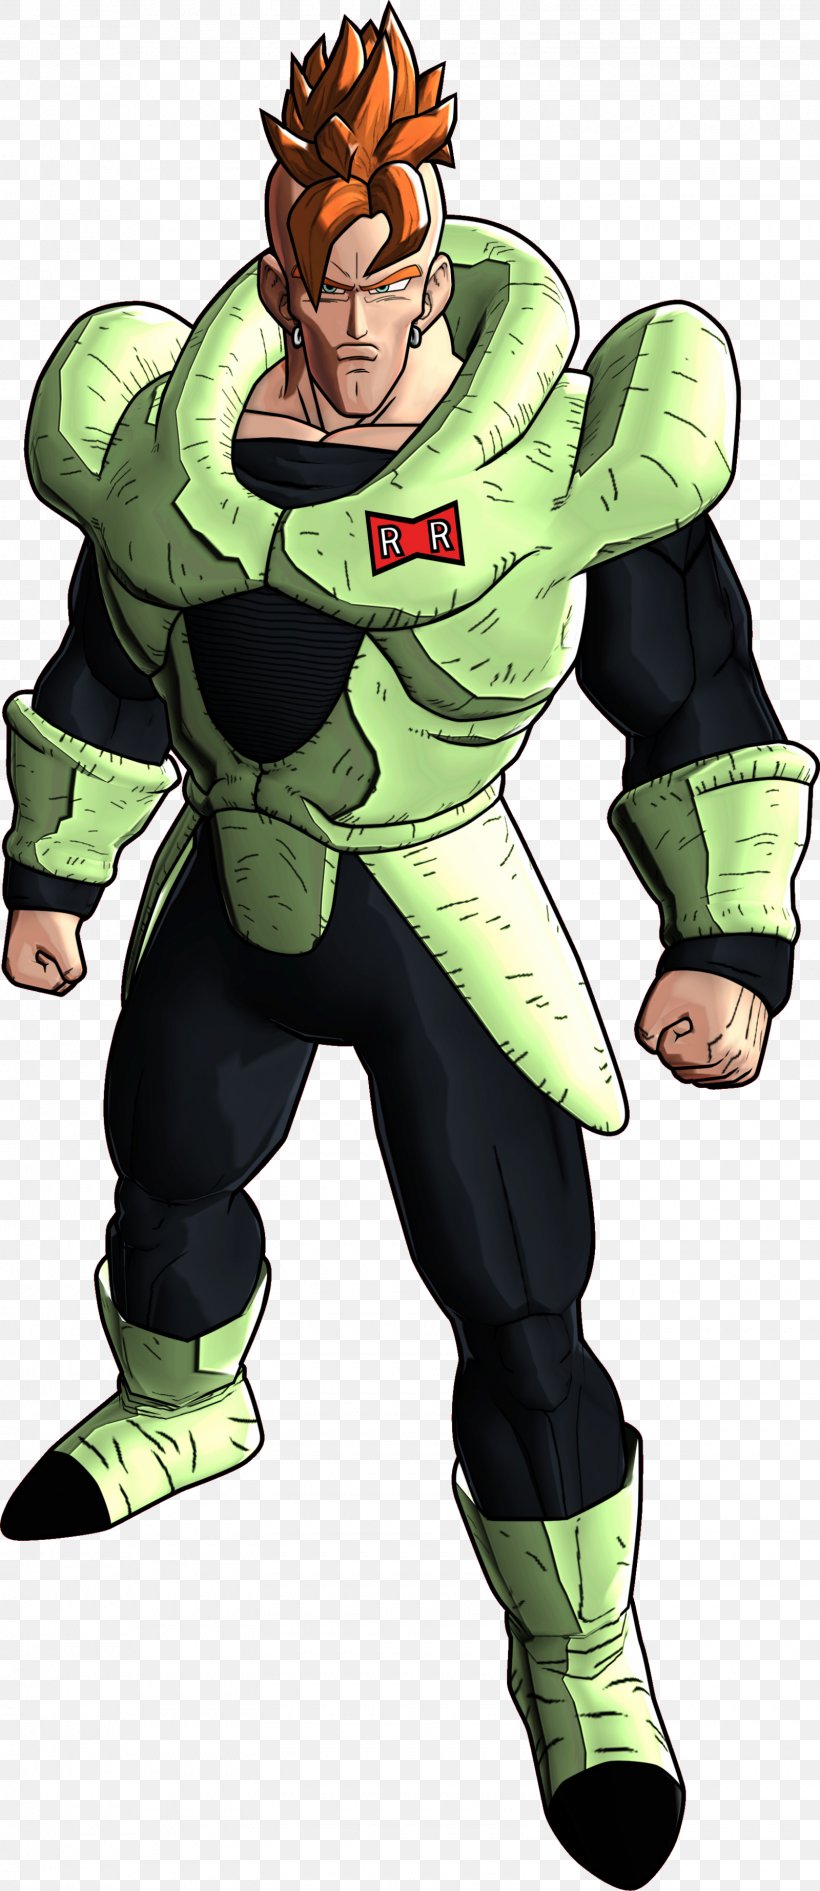 Dragon Ball Z: Battle Of Z Goku Trunks Android 16, PNG, 1600x3690px, Dragon Ball Z Battle Of Z, Android, Android 16, Art, Character Download Free